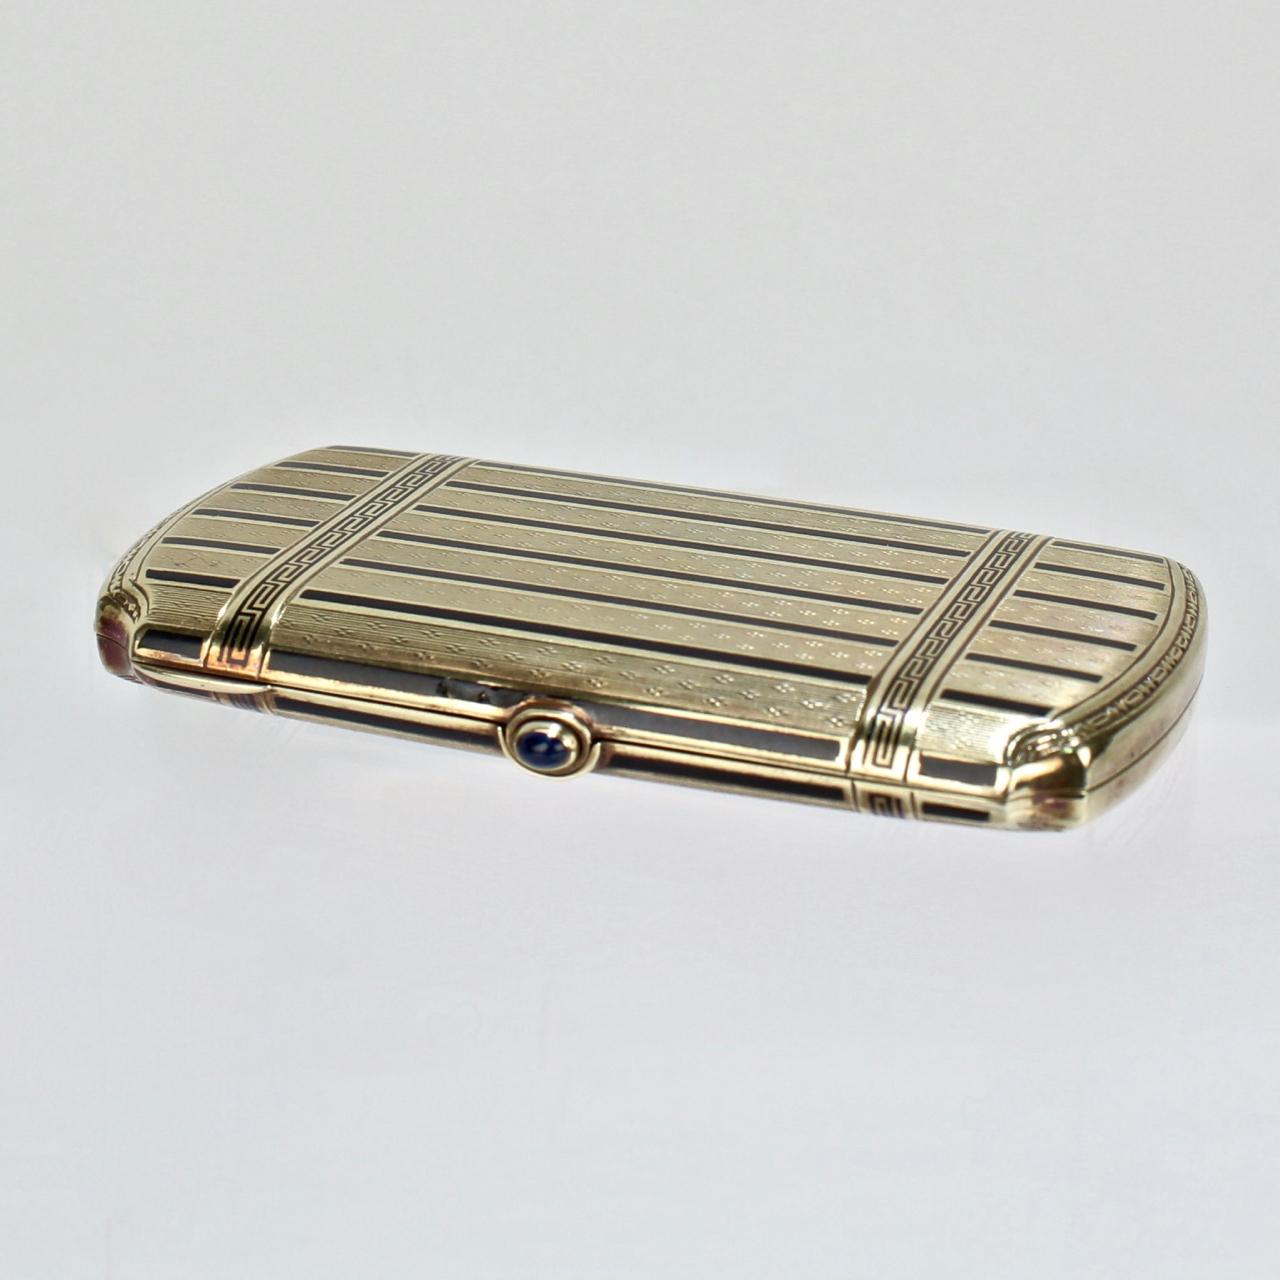 An exceptionally fine Art Deco period lady's 14 karat gold and enamel cigarette case.

Made in America in the early part of the 20th century.

With engine-turned engraving, blue enamel decoration, and a sapphire cabochon push-button clasp.

The